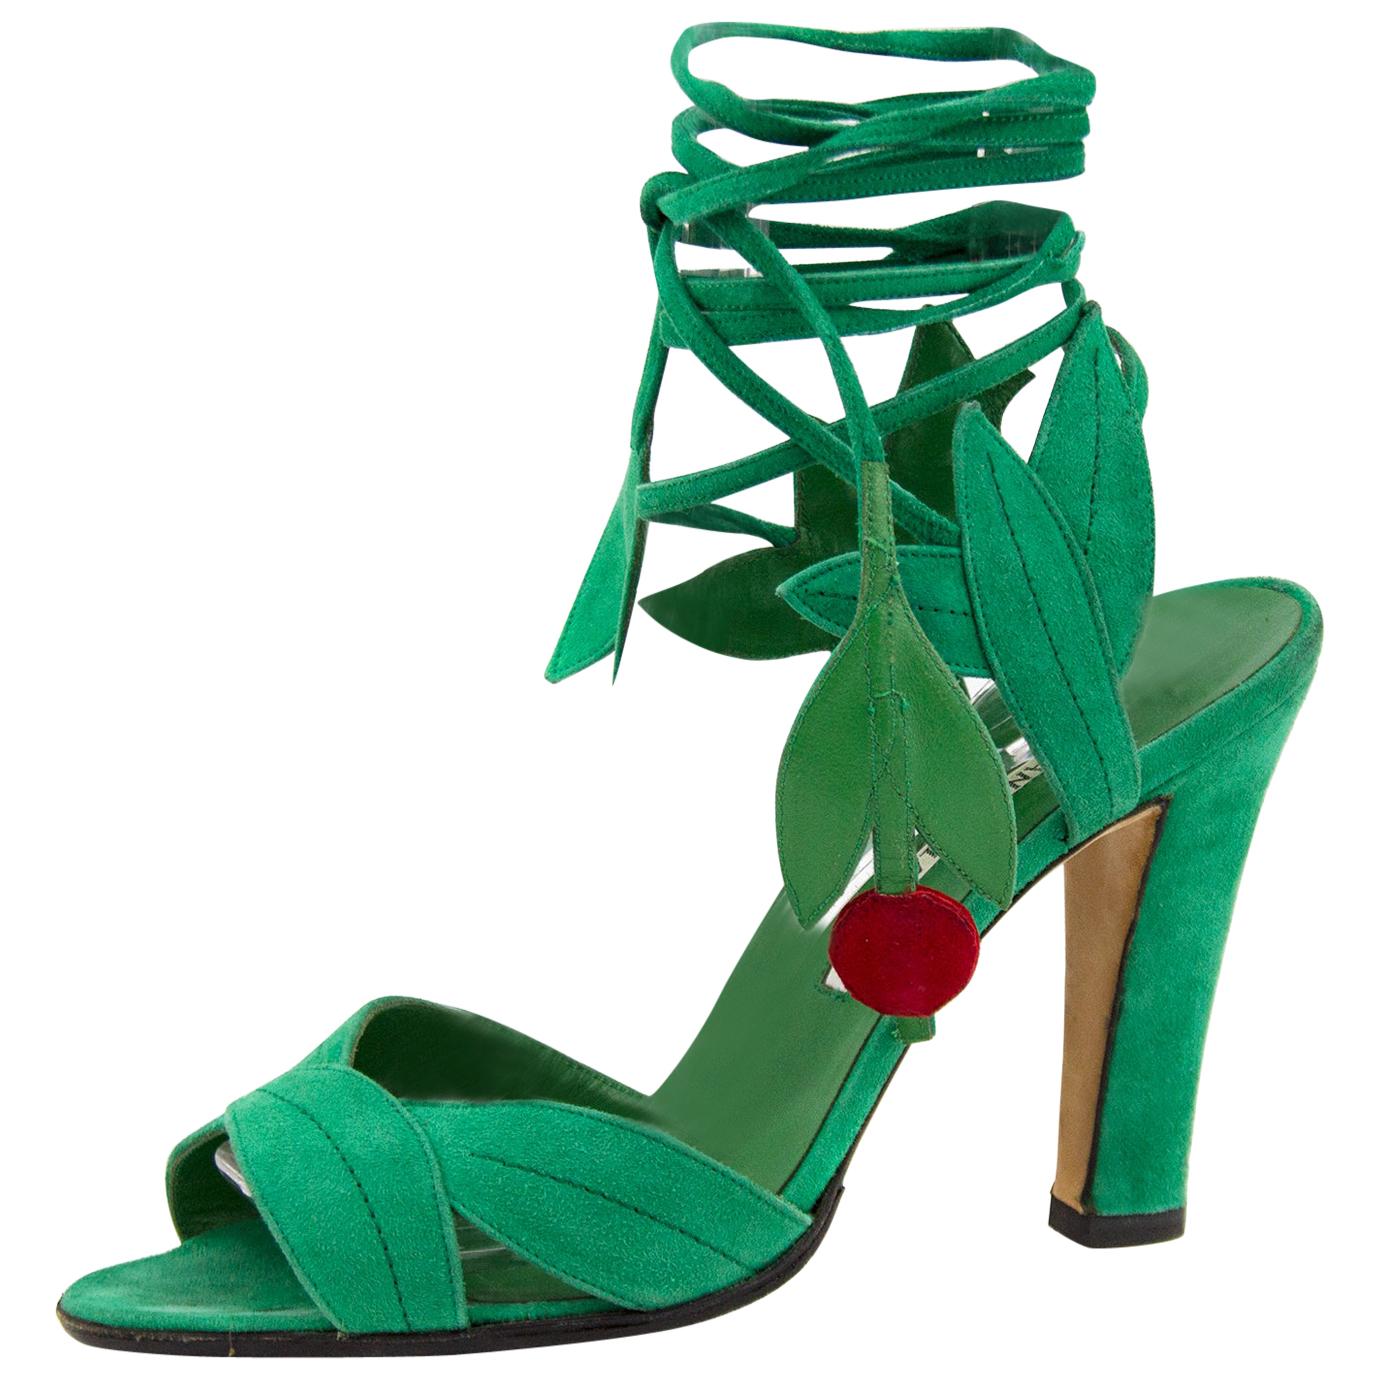 2003 Remake of the 1971 'Ivy Shoe' By Manolo Blahnik for Ossie 